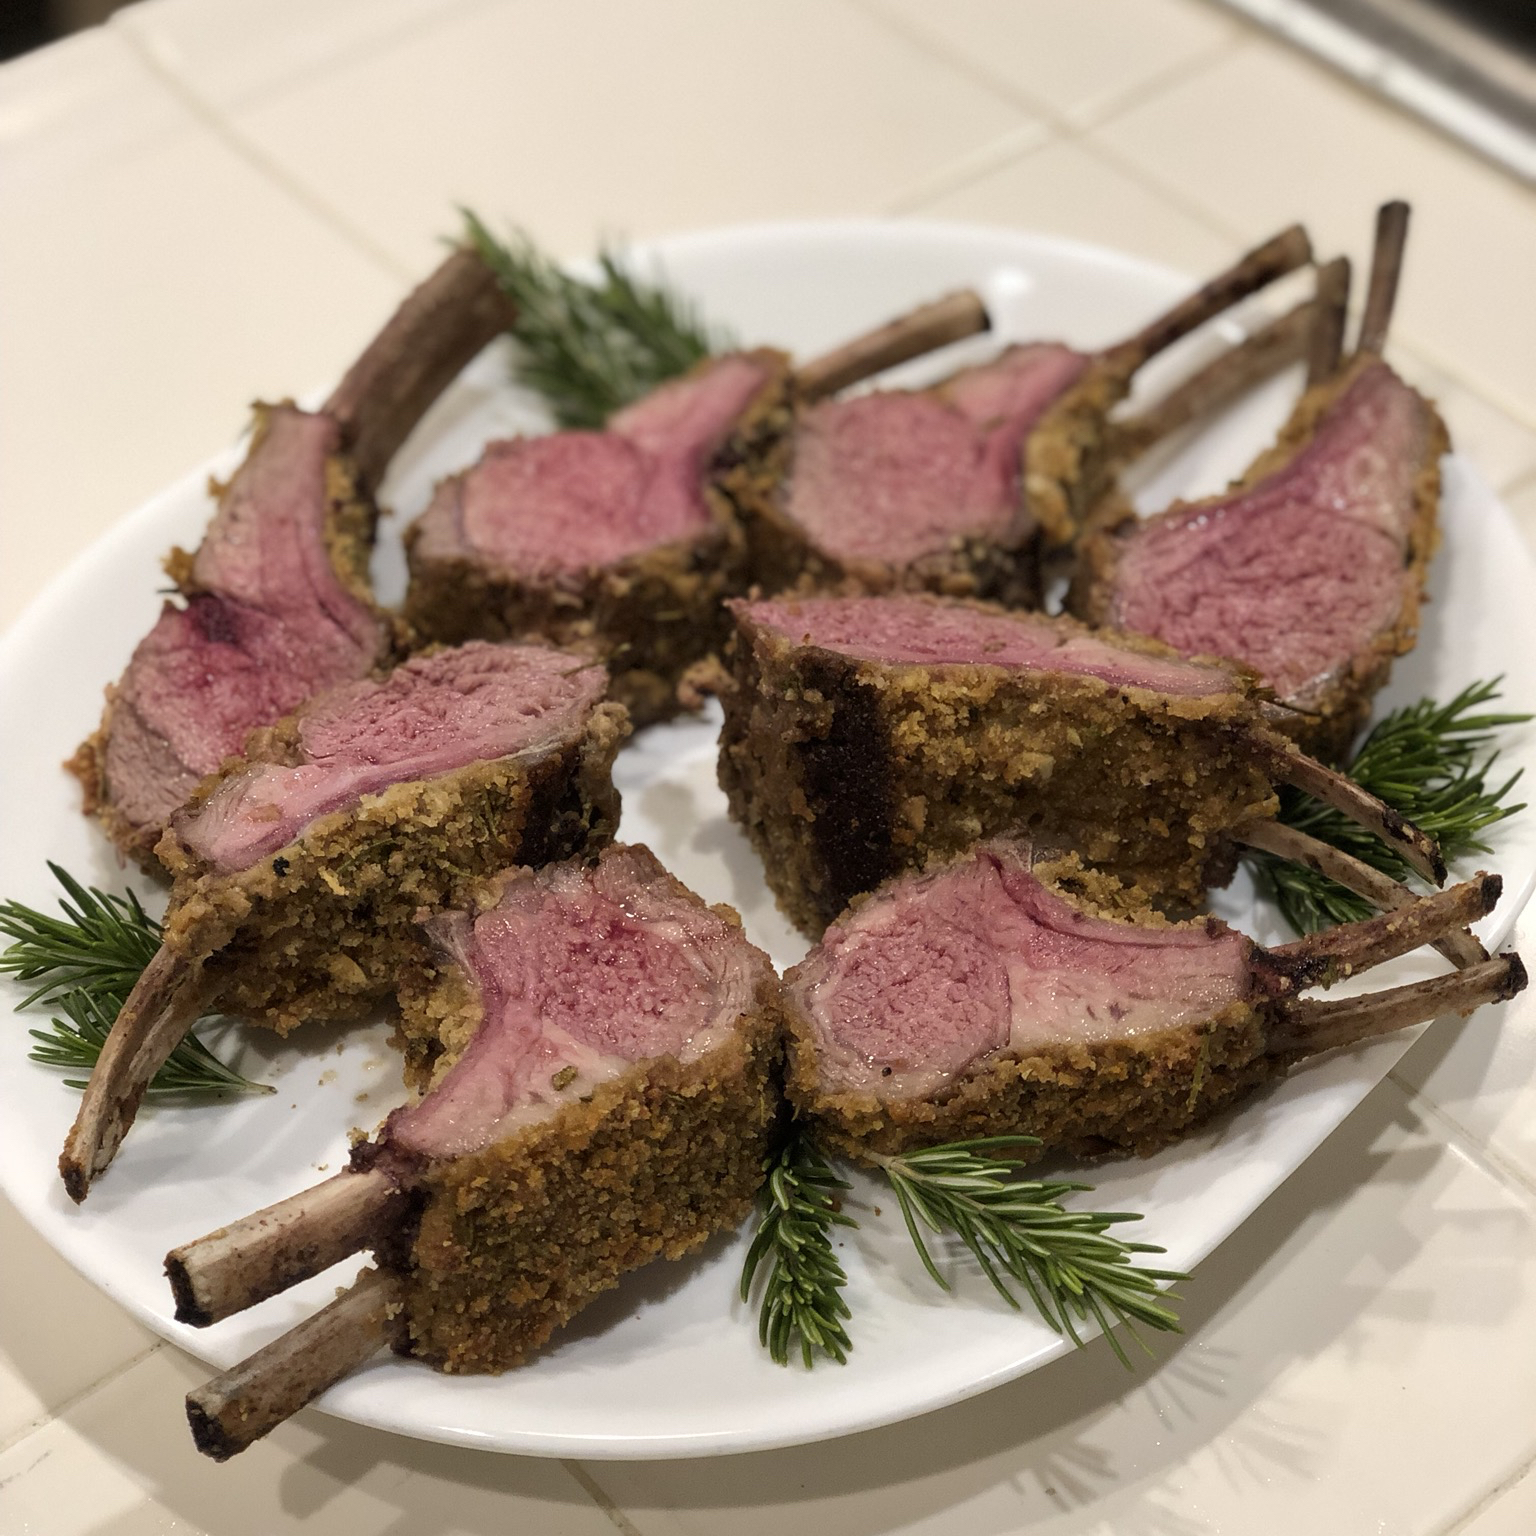 100% Pastured Grass-fed & Grass Finished Roasted Rack of Lamb Recipe